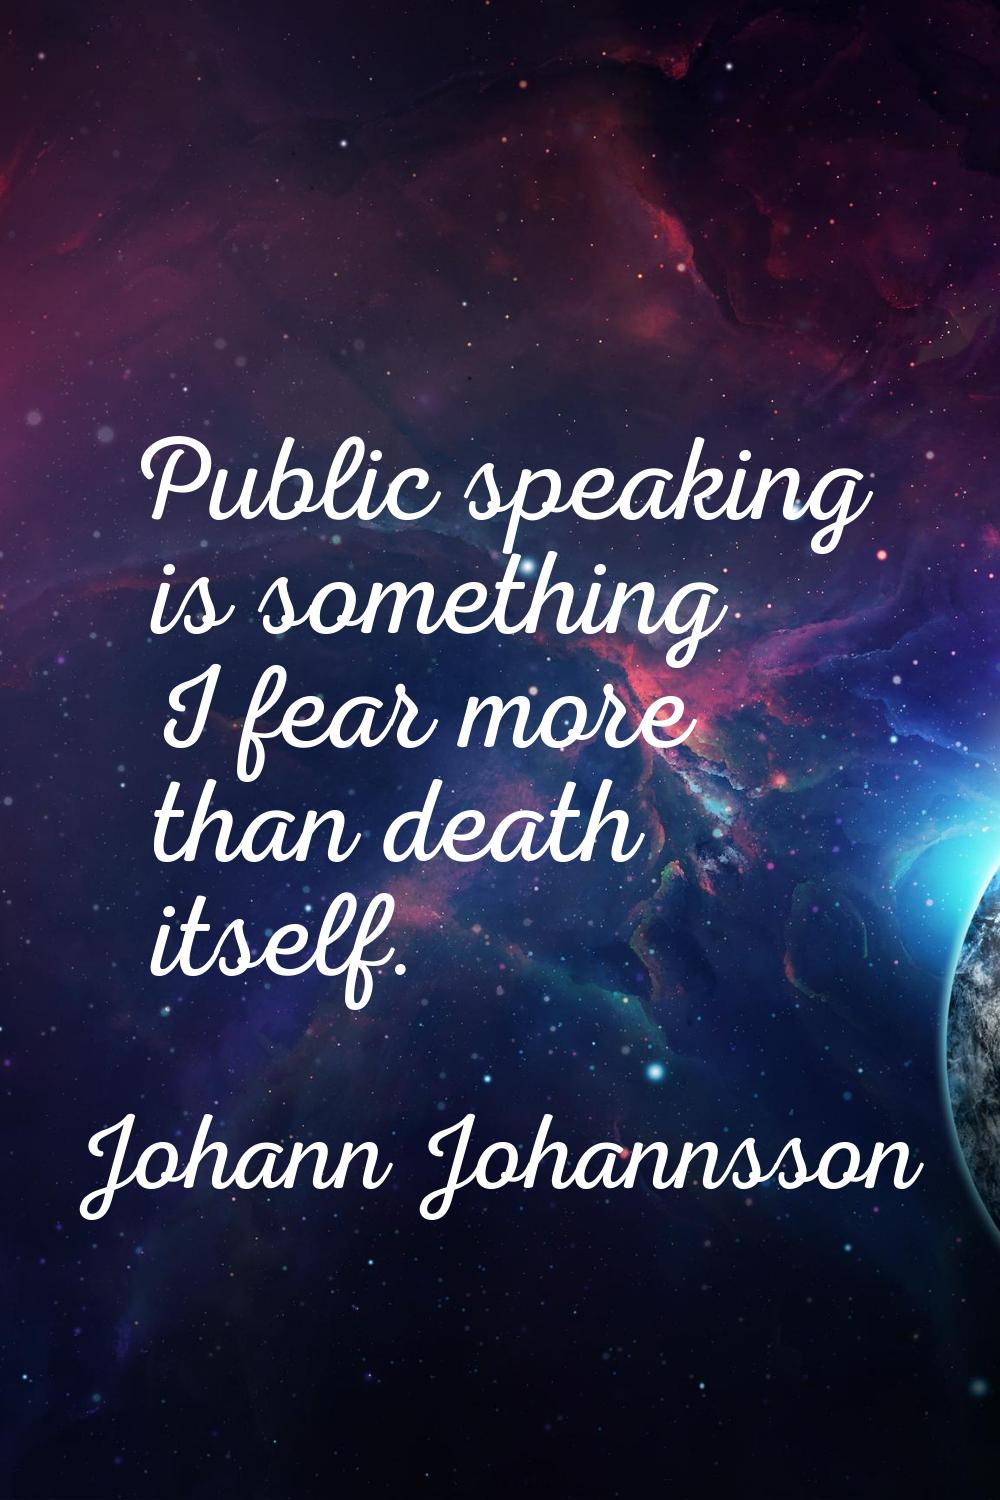 Public speaking is something I fear more than death itself.